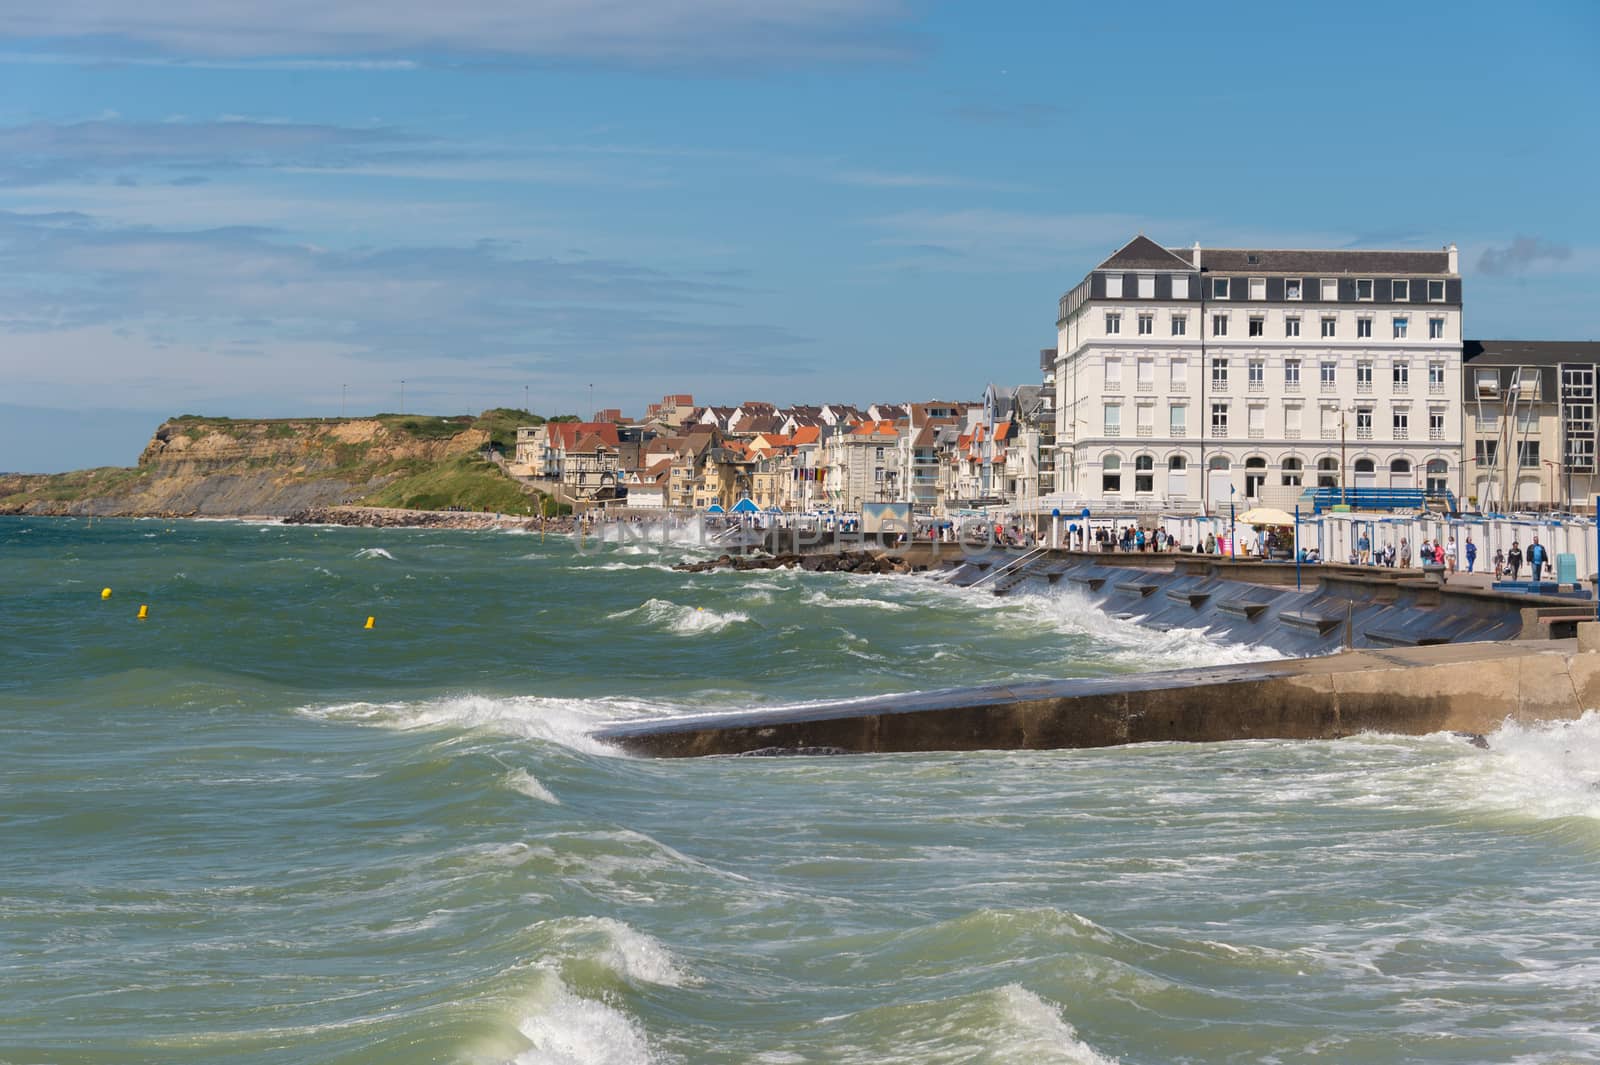 Wimereux seafront promenade (France) by mbruxelle